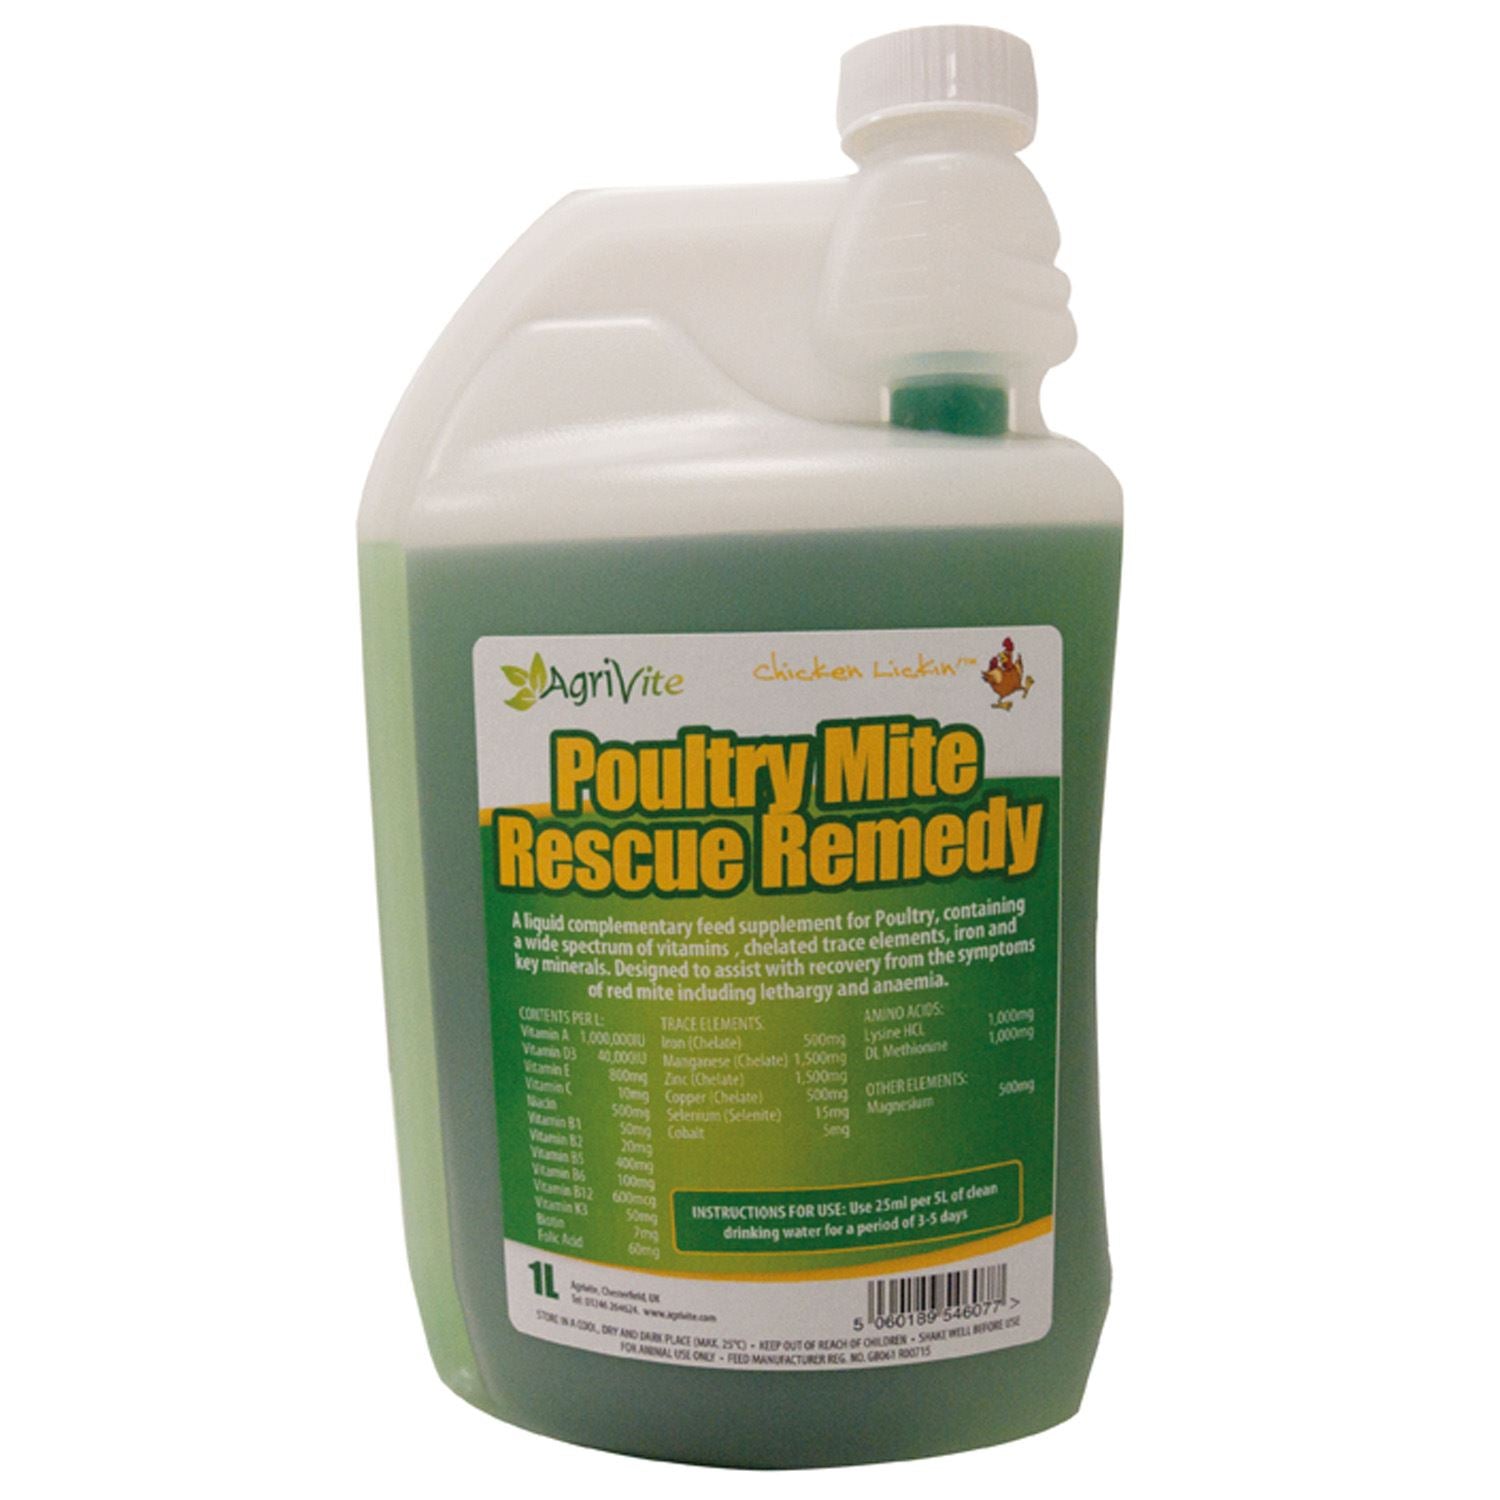 Tusk Agrivite Poultry Mite Rescue Remedy - Just Horse Riders